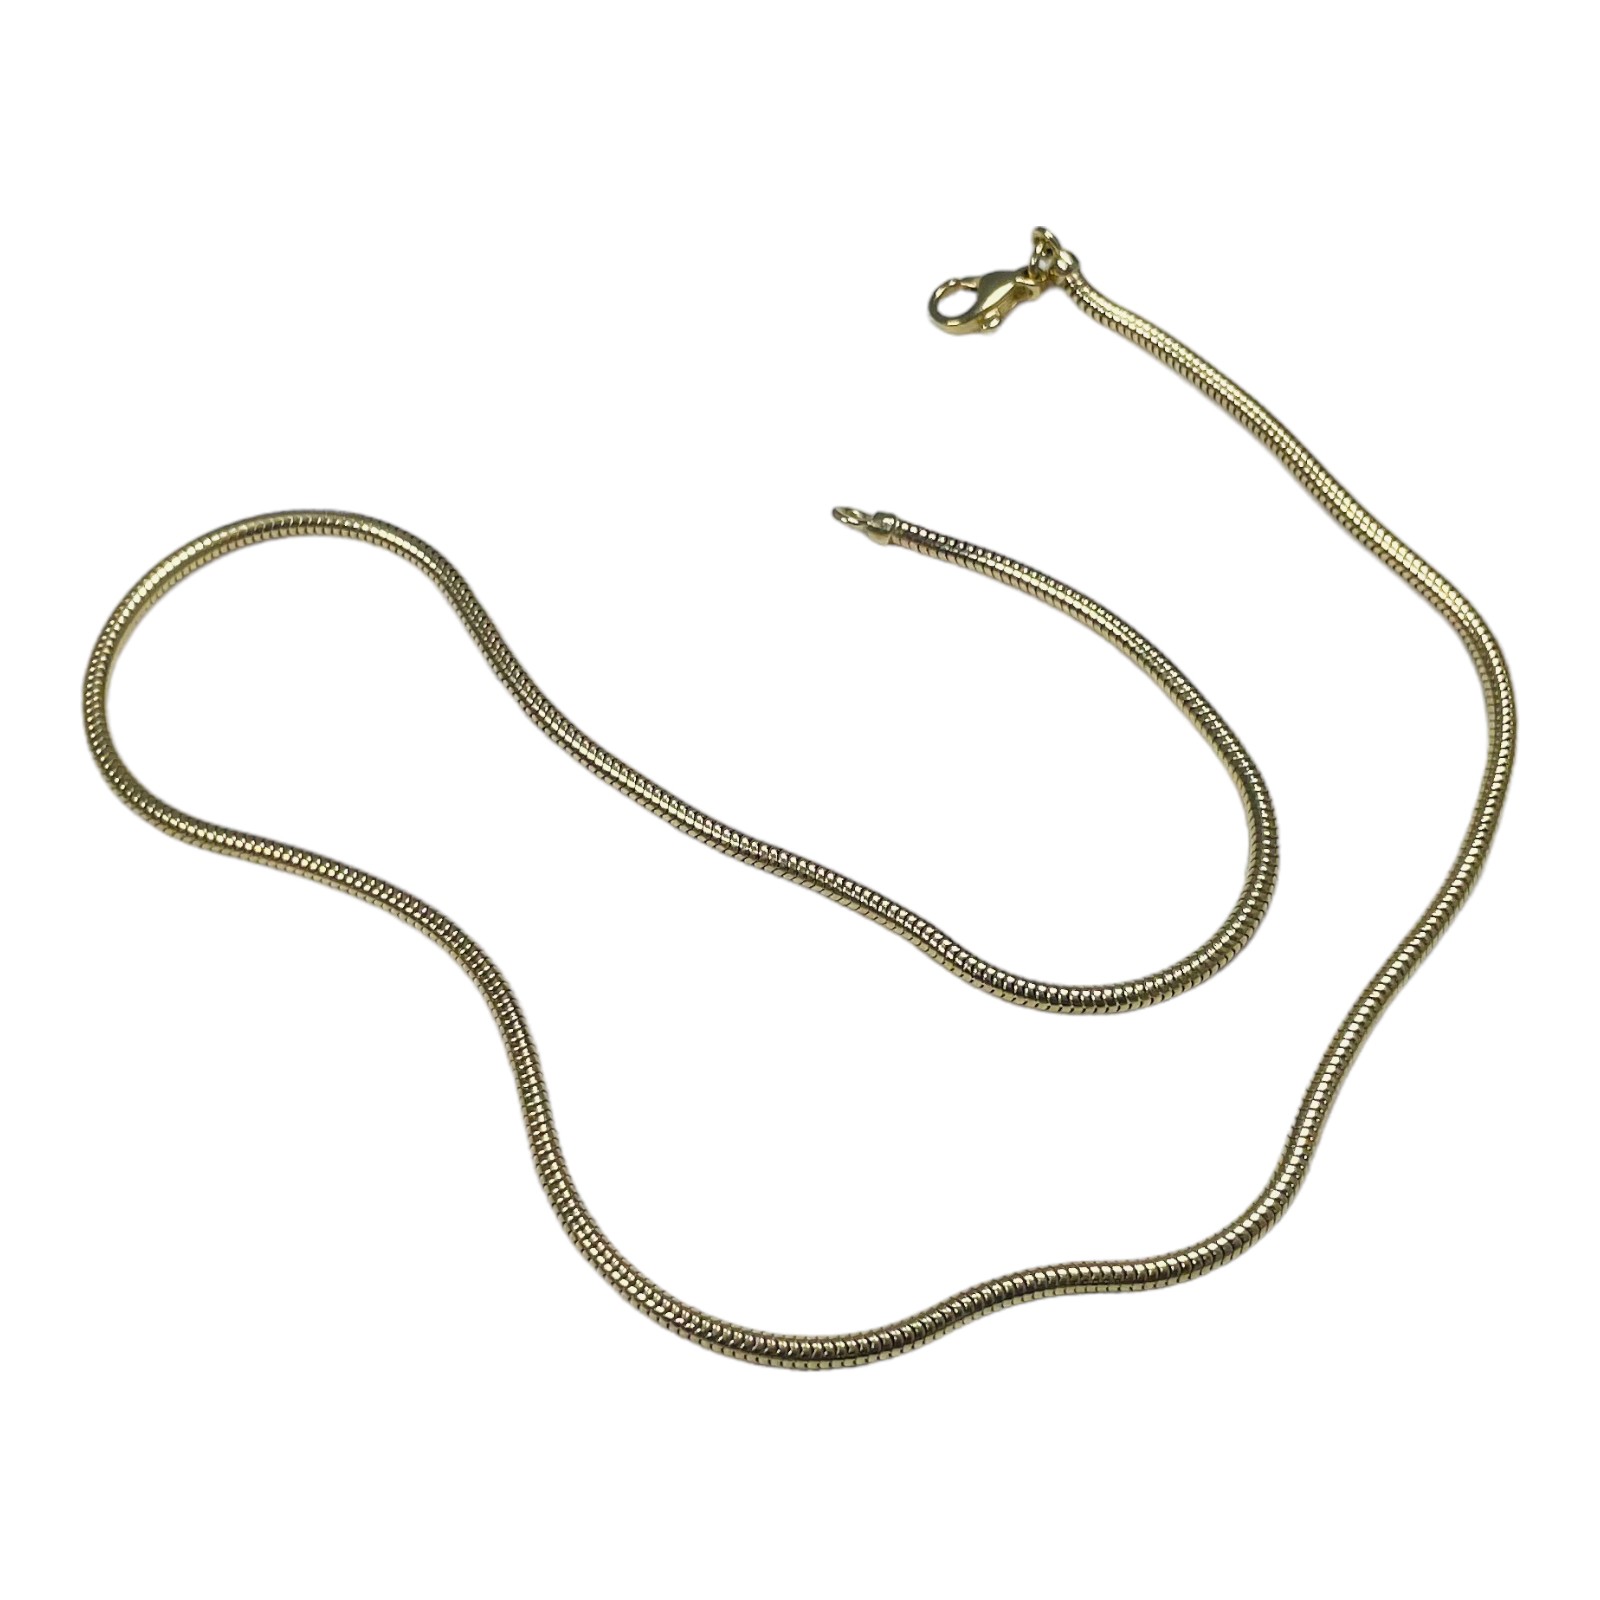 A 9ct yellow gold snake link chain, 18 inches in length, weighs 12.9 grams, Birmingham hallmarks. - Image 3 of 6